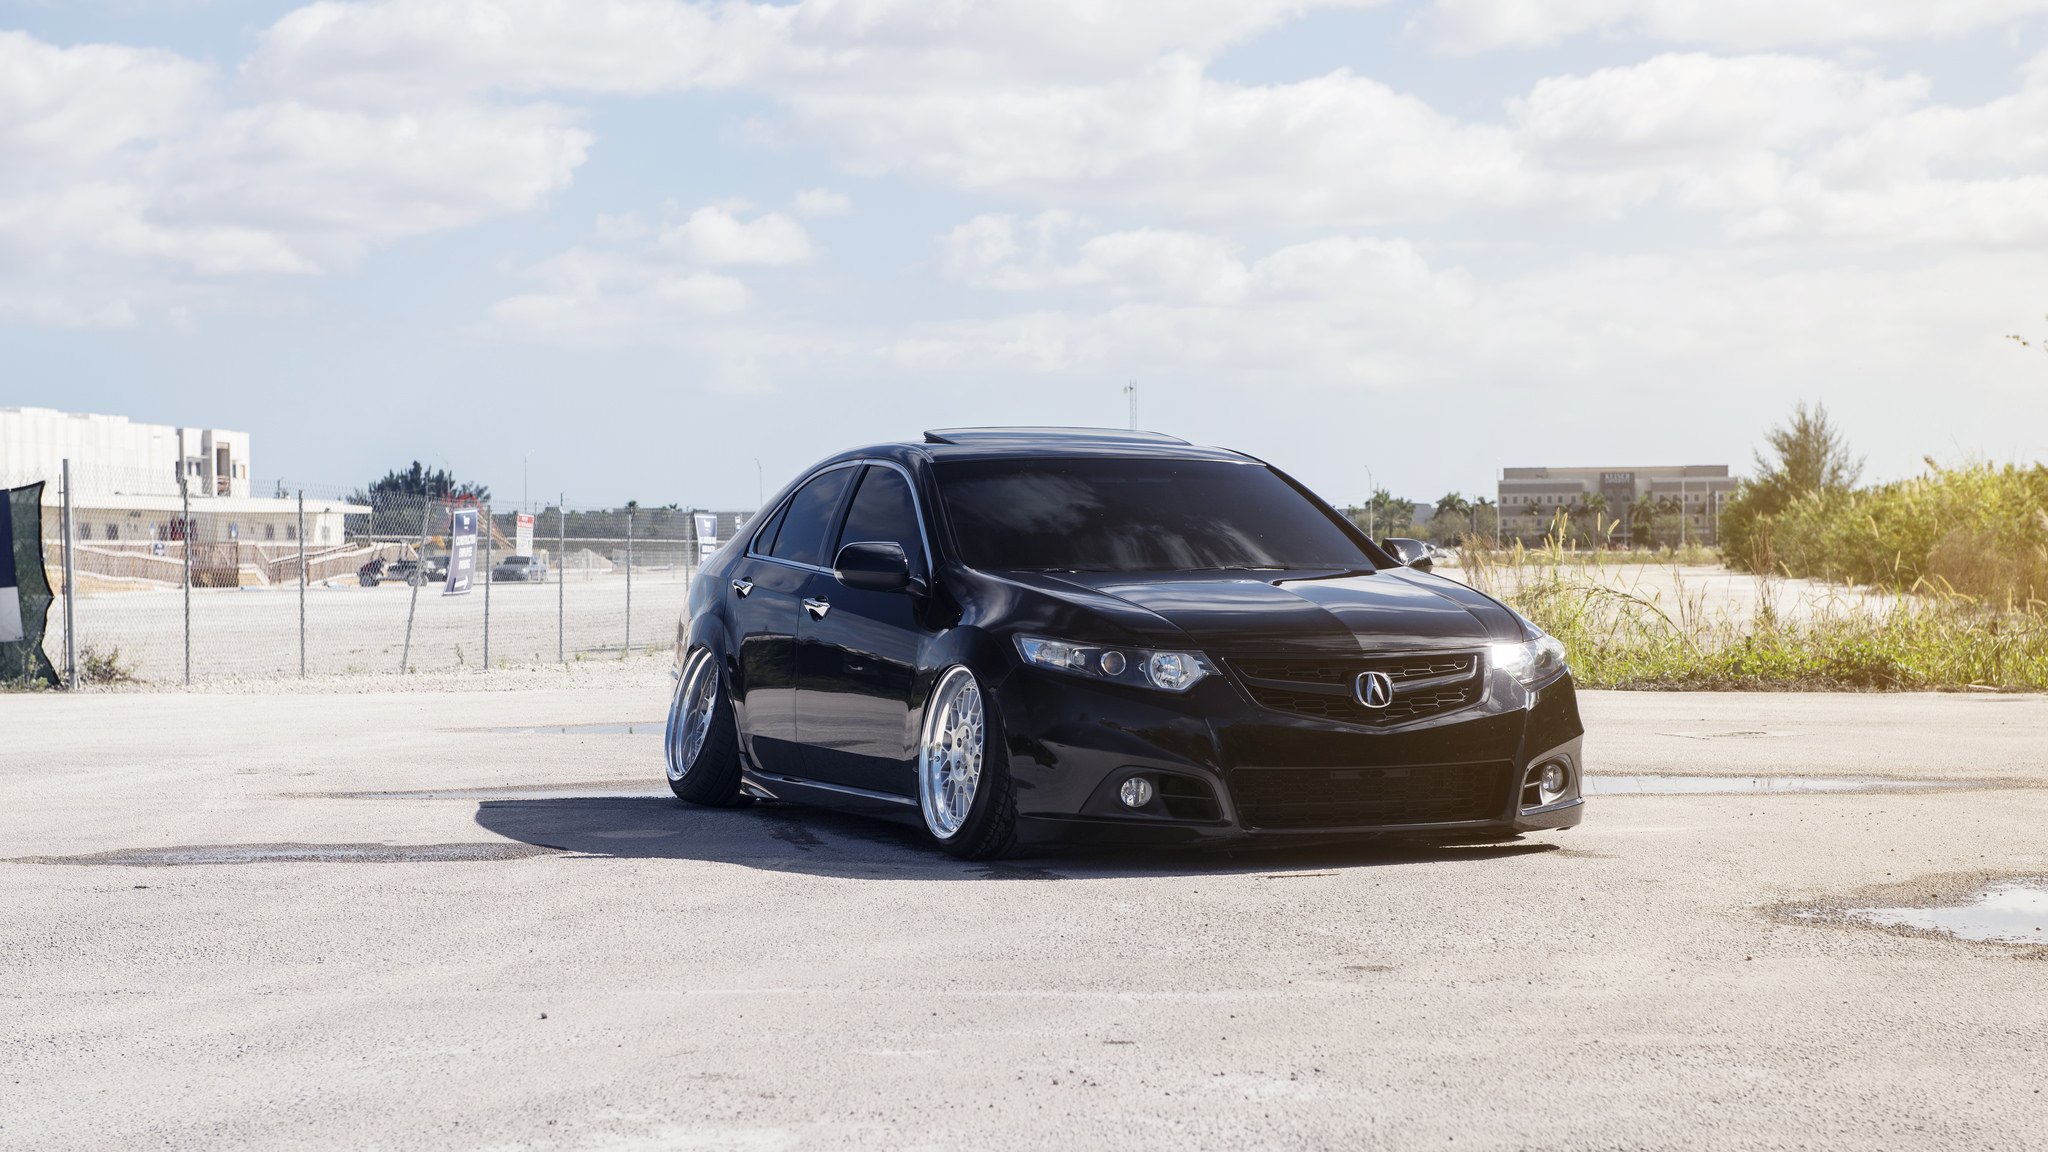 Slammed TSX With Radical Camber and Polished Rotiform Rims - Photo by Rotif...